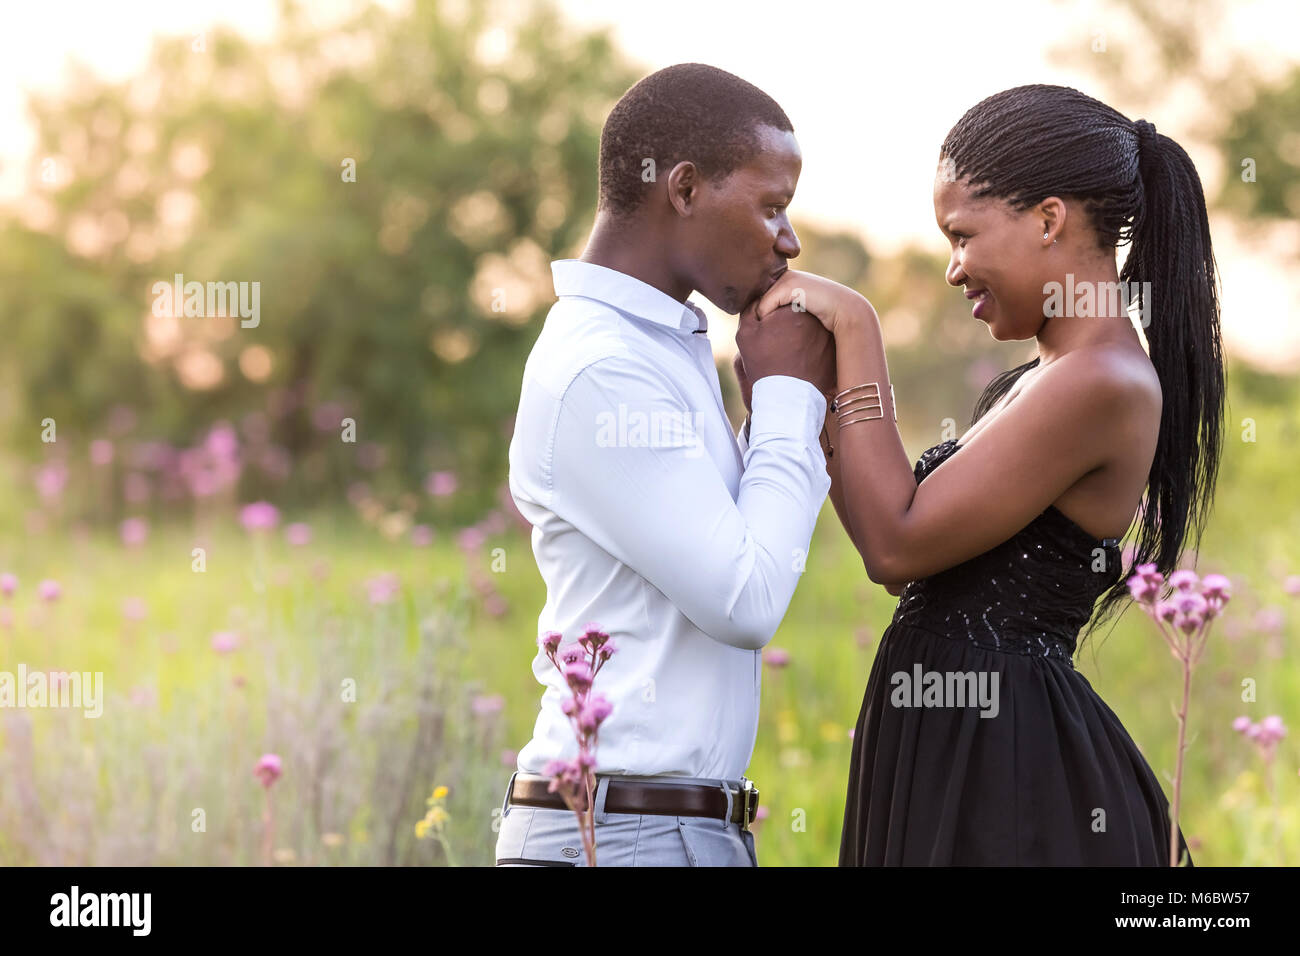 Young couple in romantic embrace in a field. Stock Photo